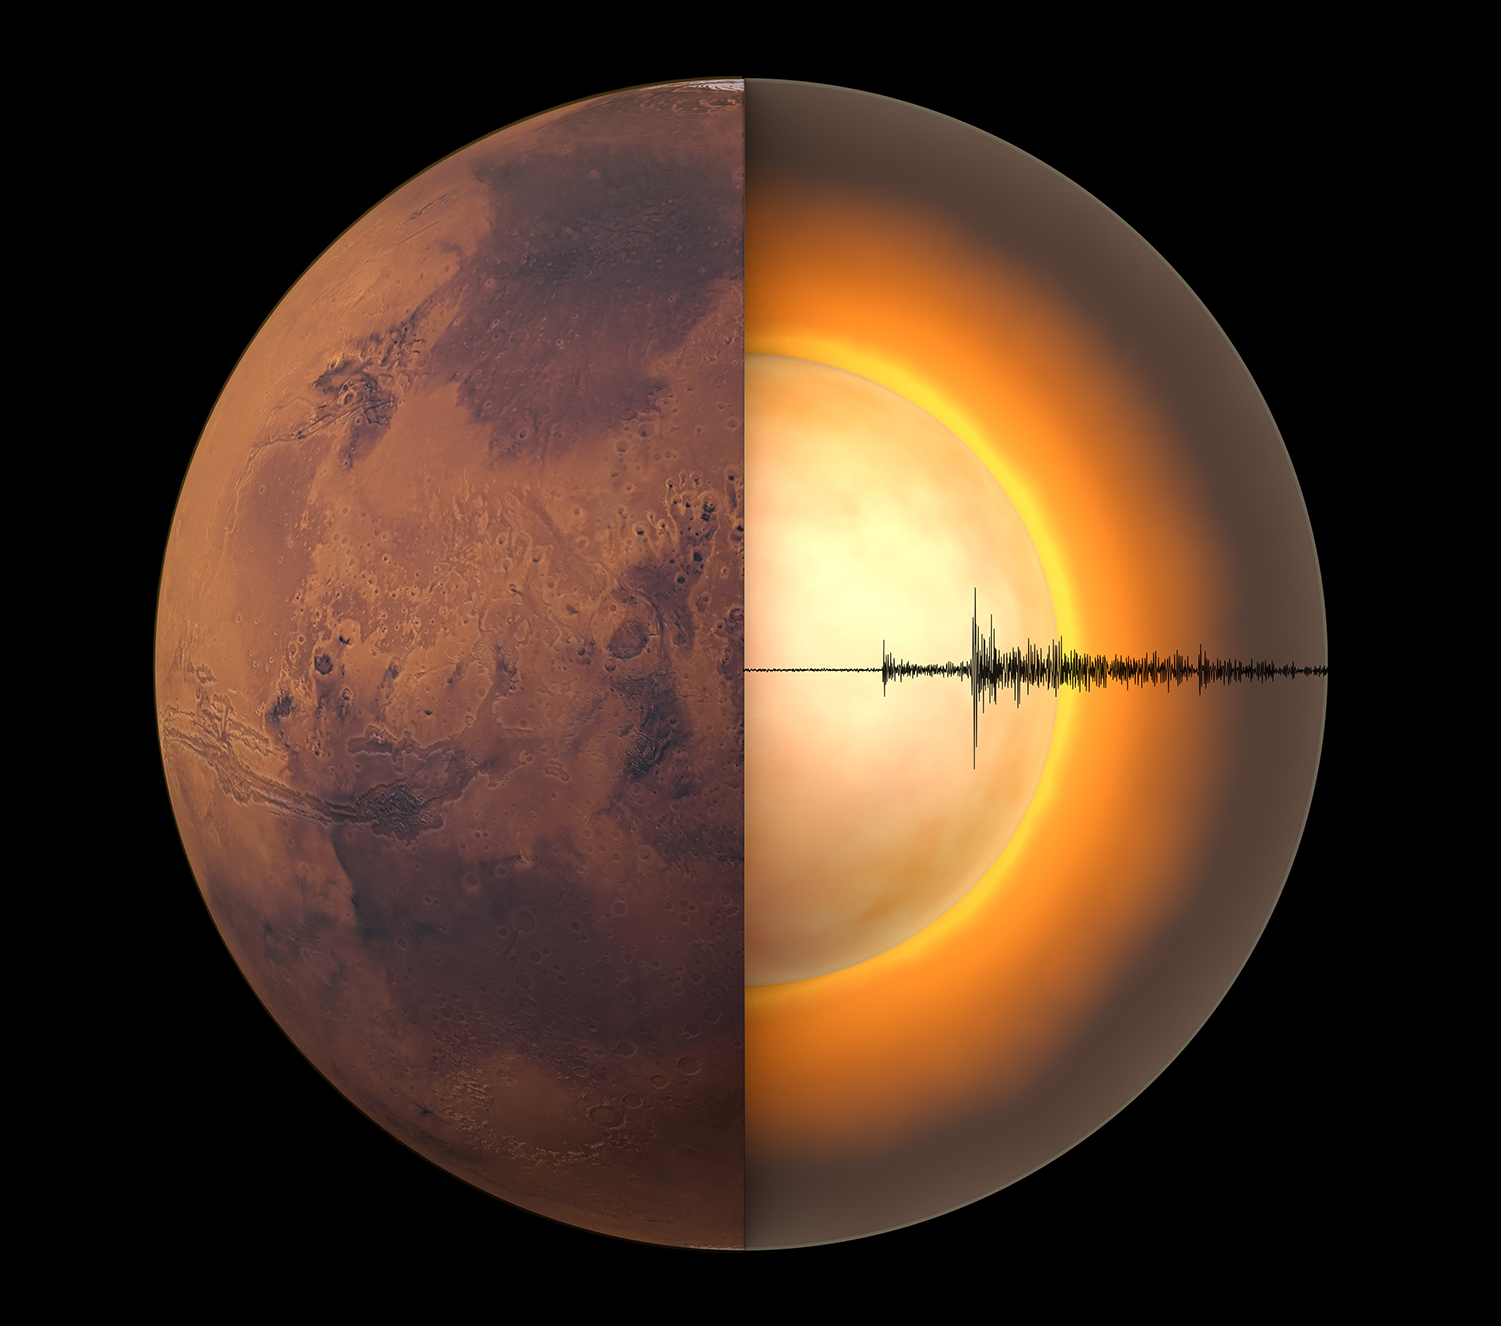 Using seismic data, researchers have now measured the red planet’s crust, mantle and core (Graphic: Chris Bickel/Science, Data: InSight Mars SEIS Data Service (2019). Reprinted with permission from AAAS)